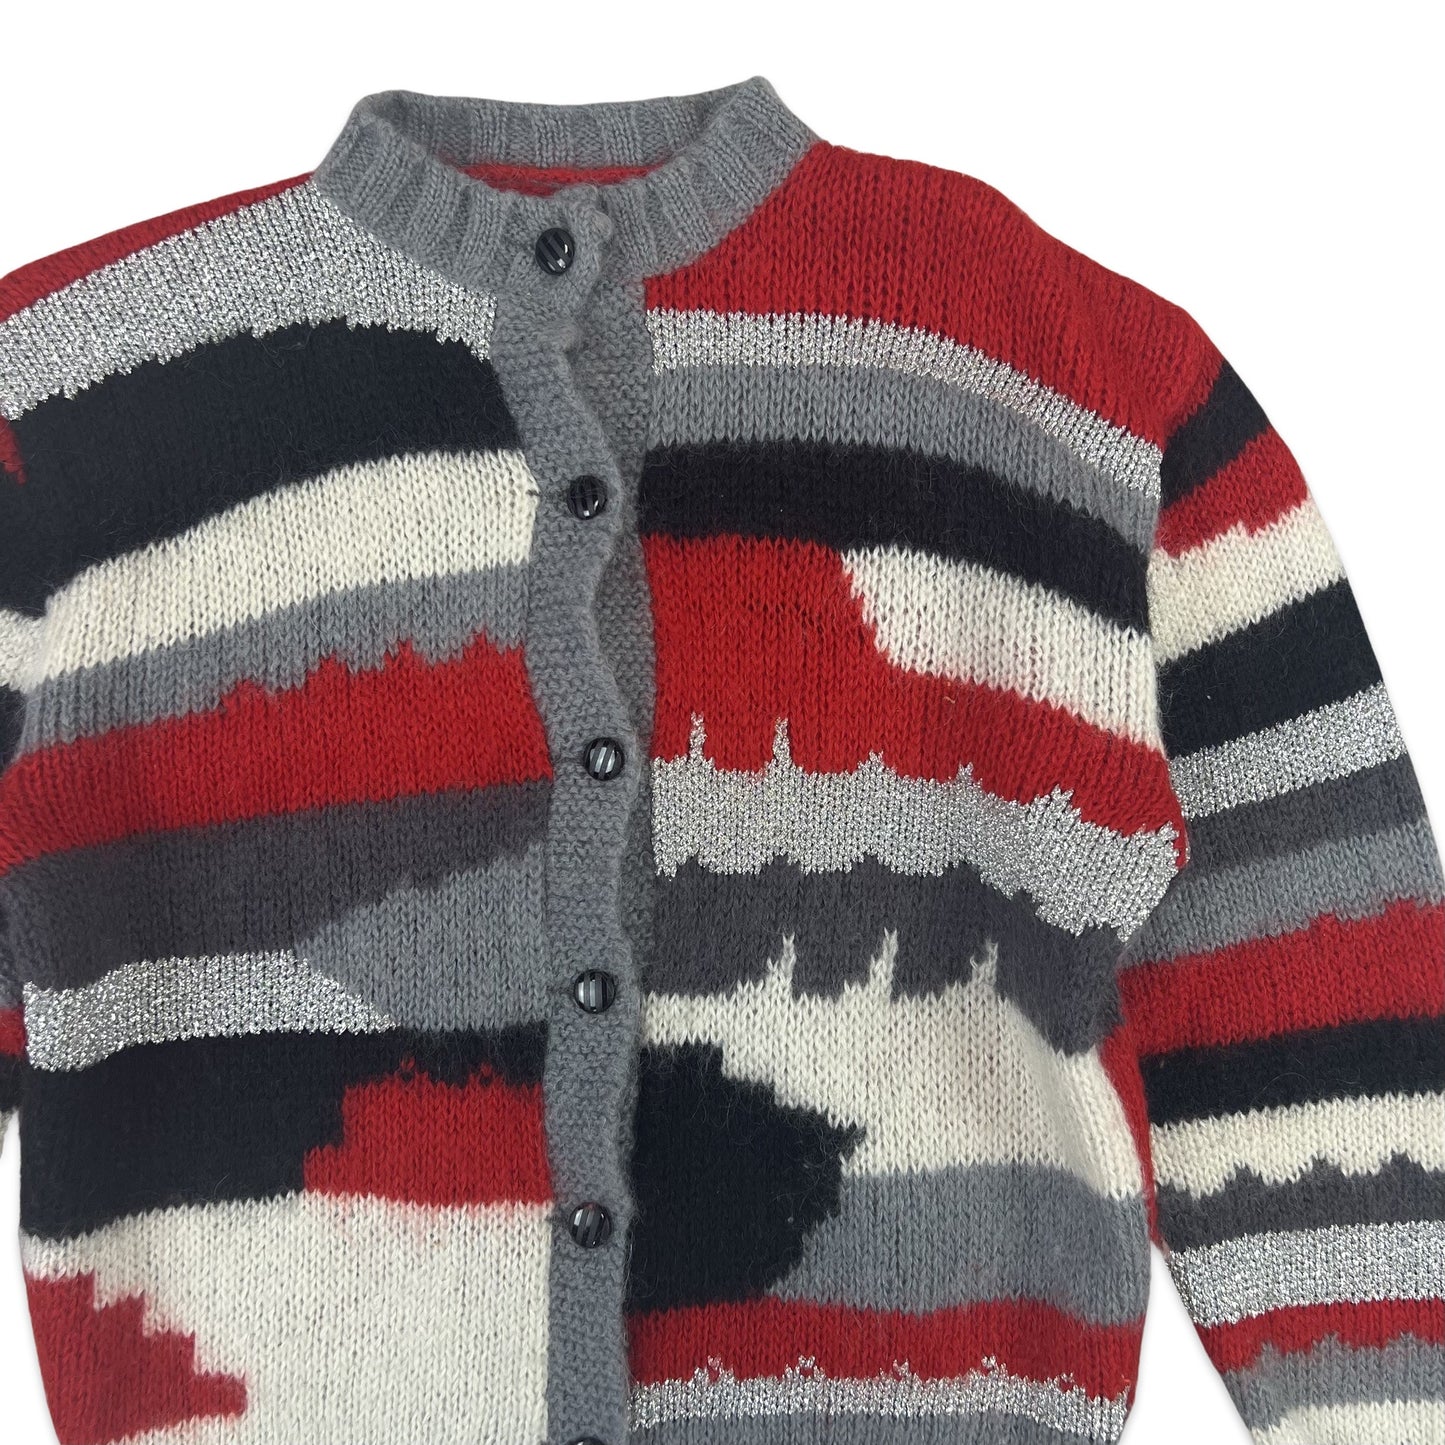 Vintage Abstract Stripe Mohair Cardigan Grey Black Red 10 12 14